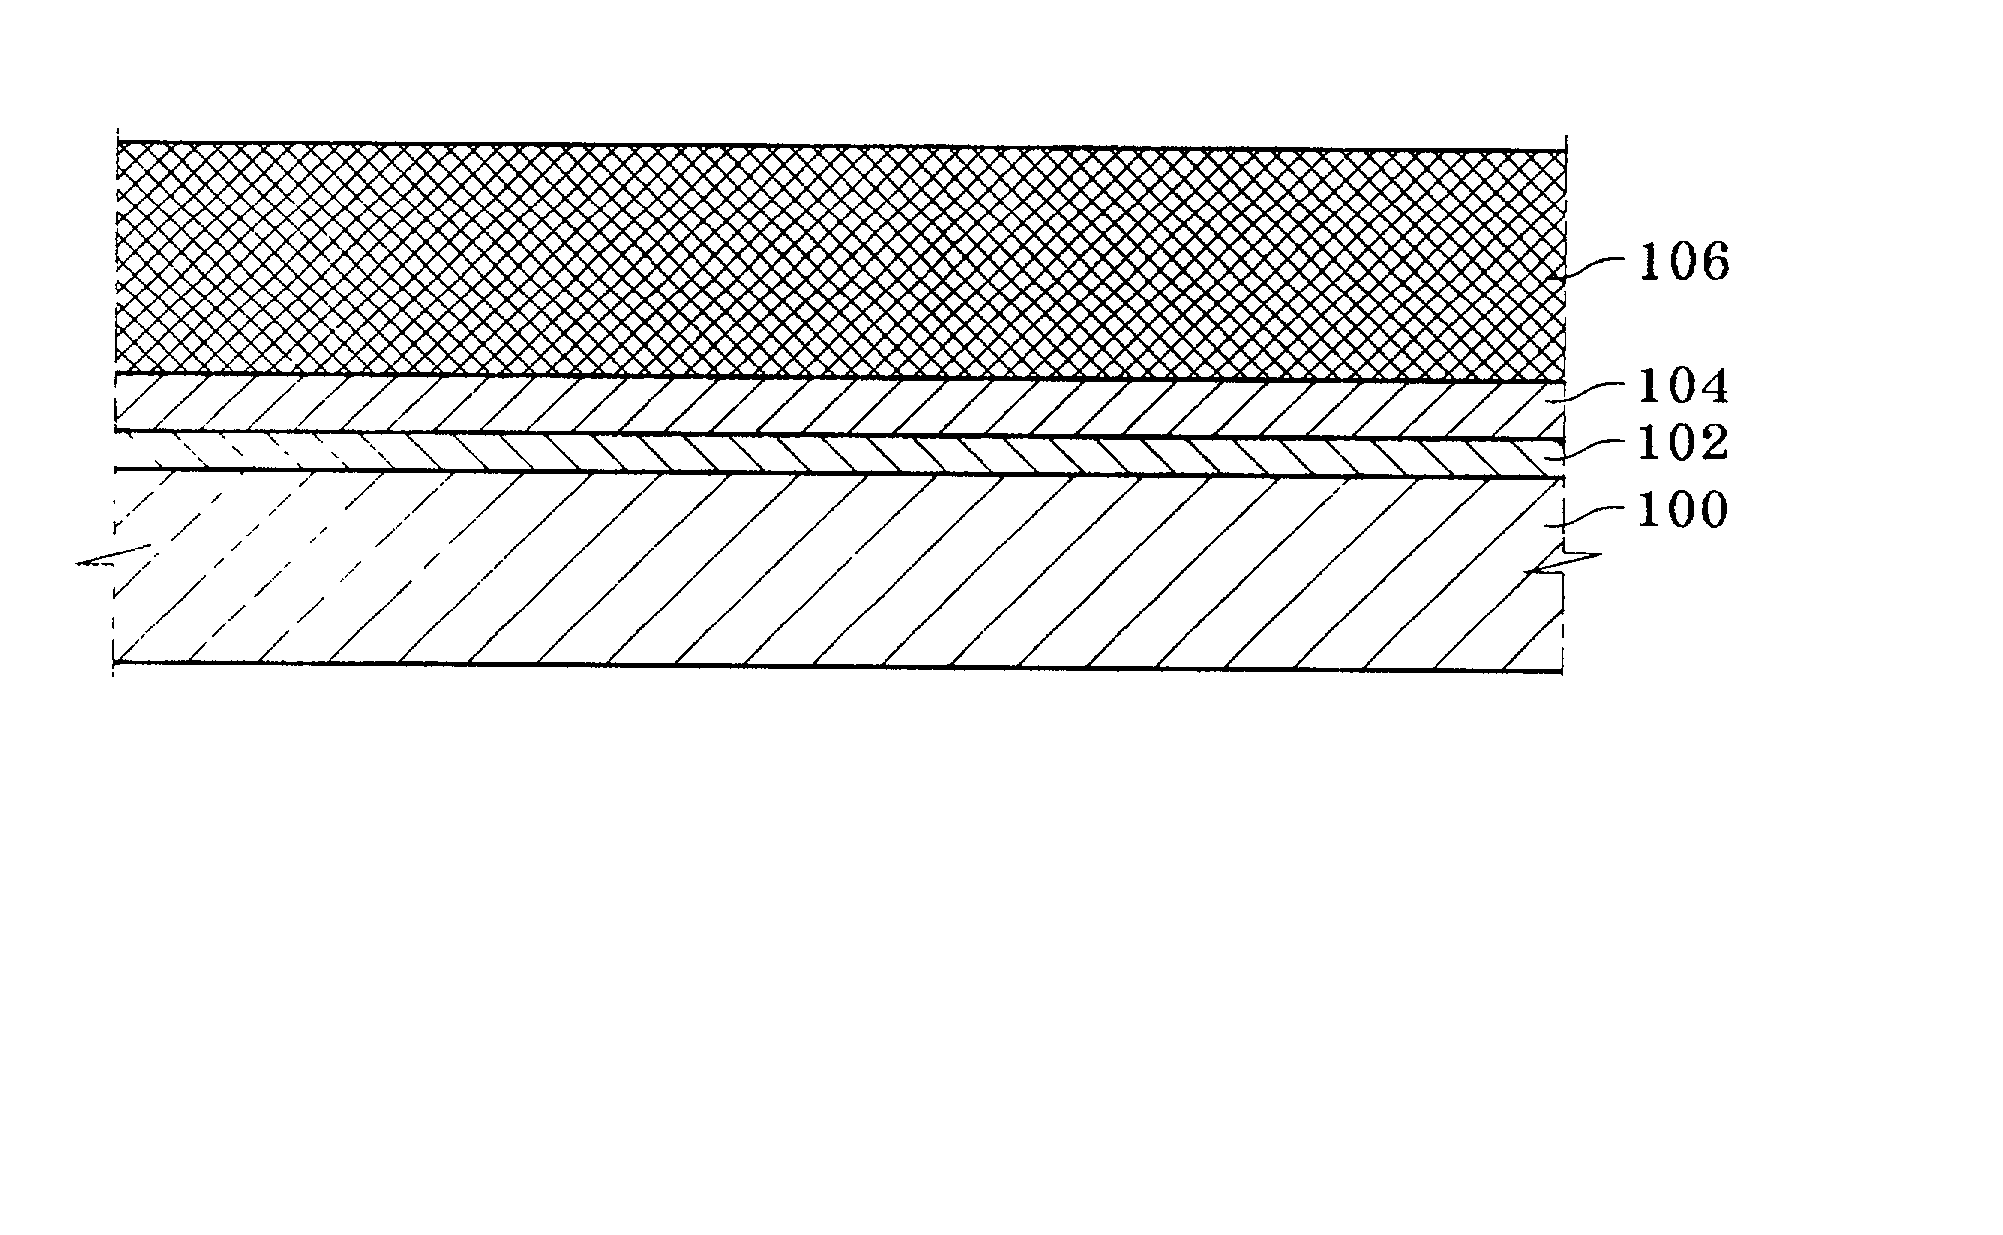 Method for manufacturing tantalum oxy nitride capacitors